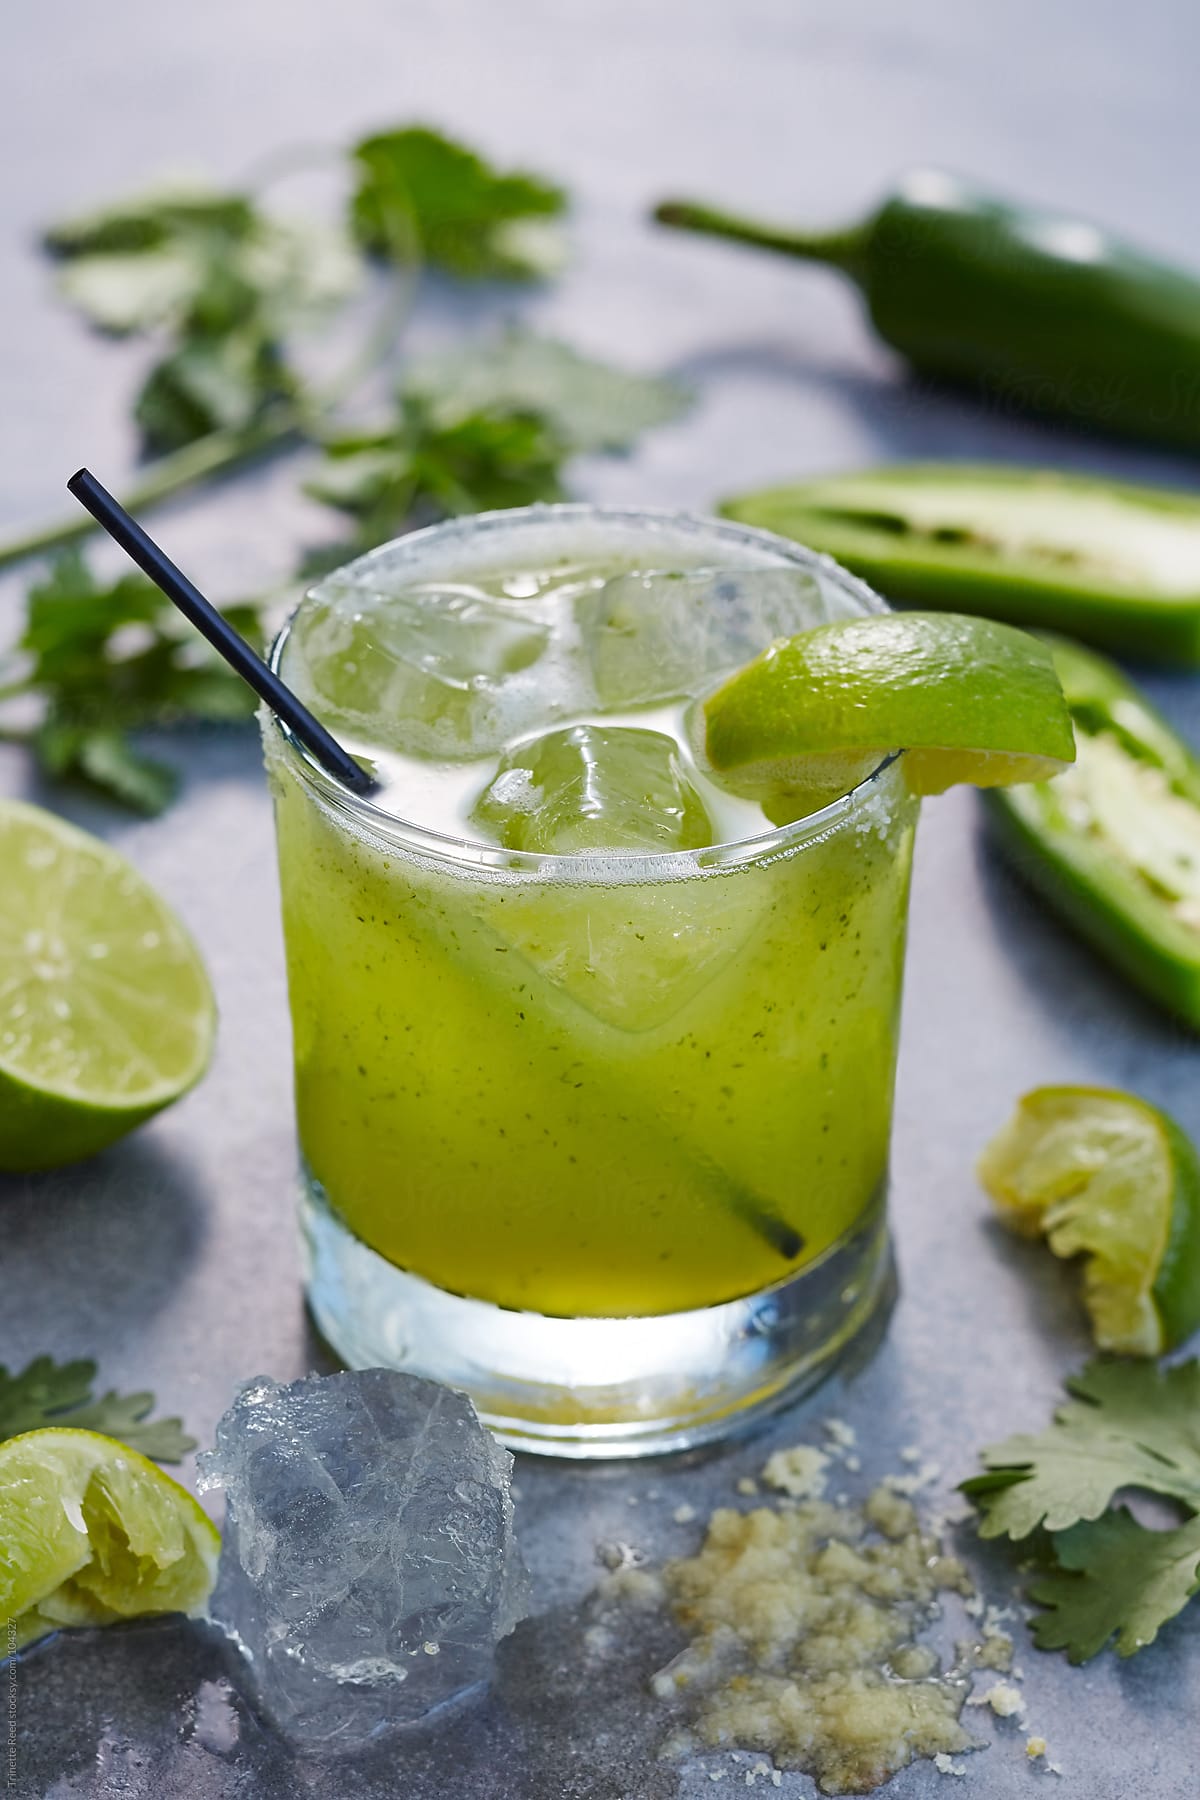 Gourmet cocktail margarita with lime, jalapeno, salt and cilantro